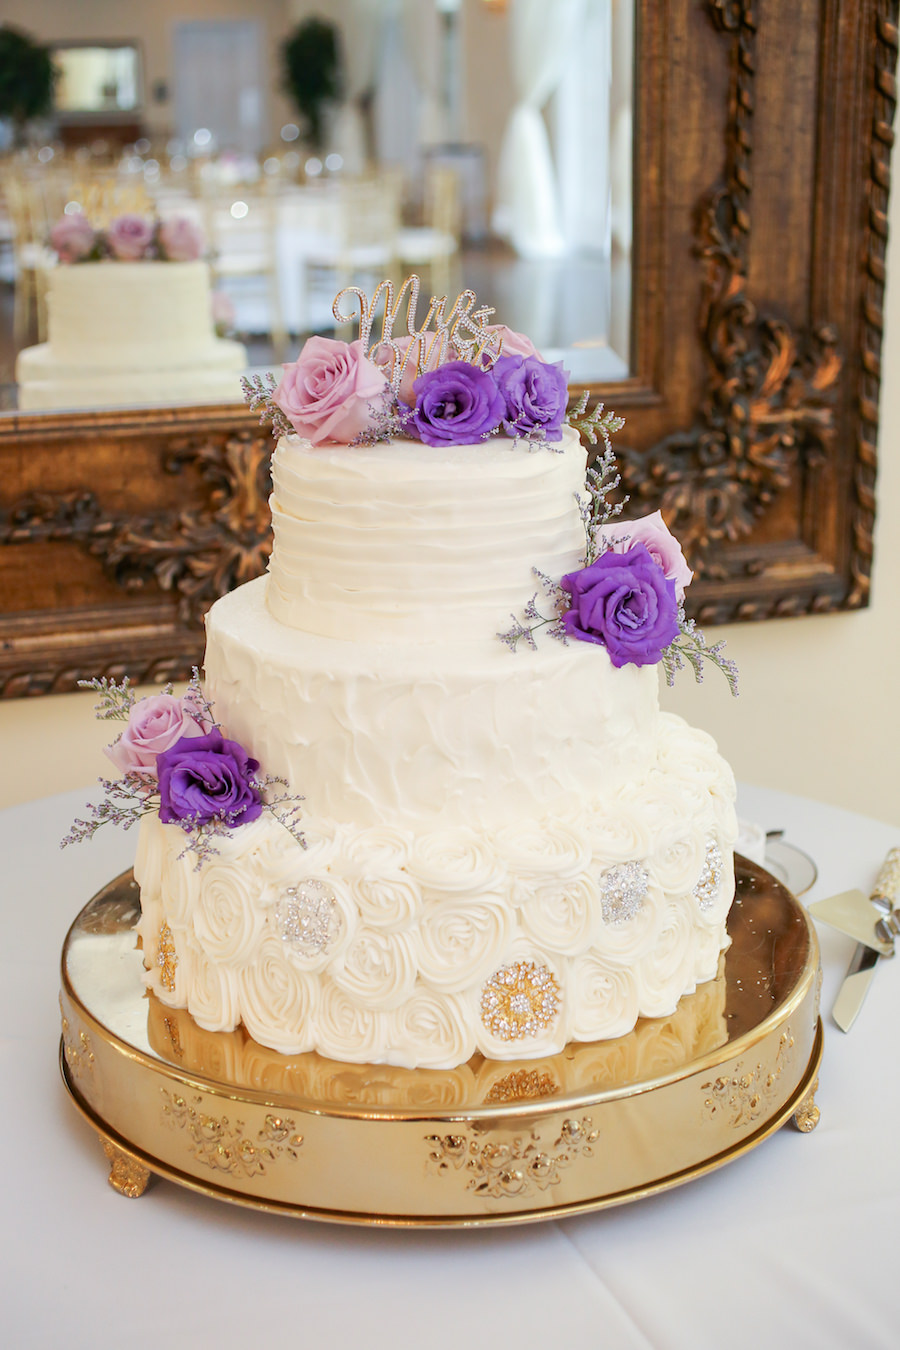 Three Tiered White Round Wedding Cake with Purple and Pink Rose Accent on Gold Cake Stand by Tampa Wedding Cake Shop Olympia Catering